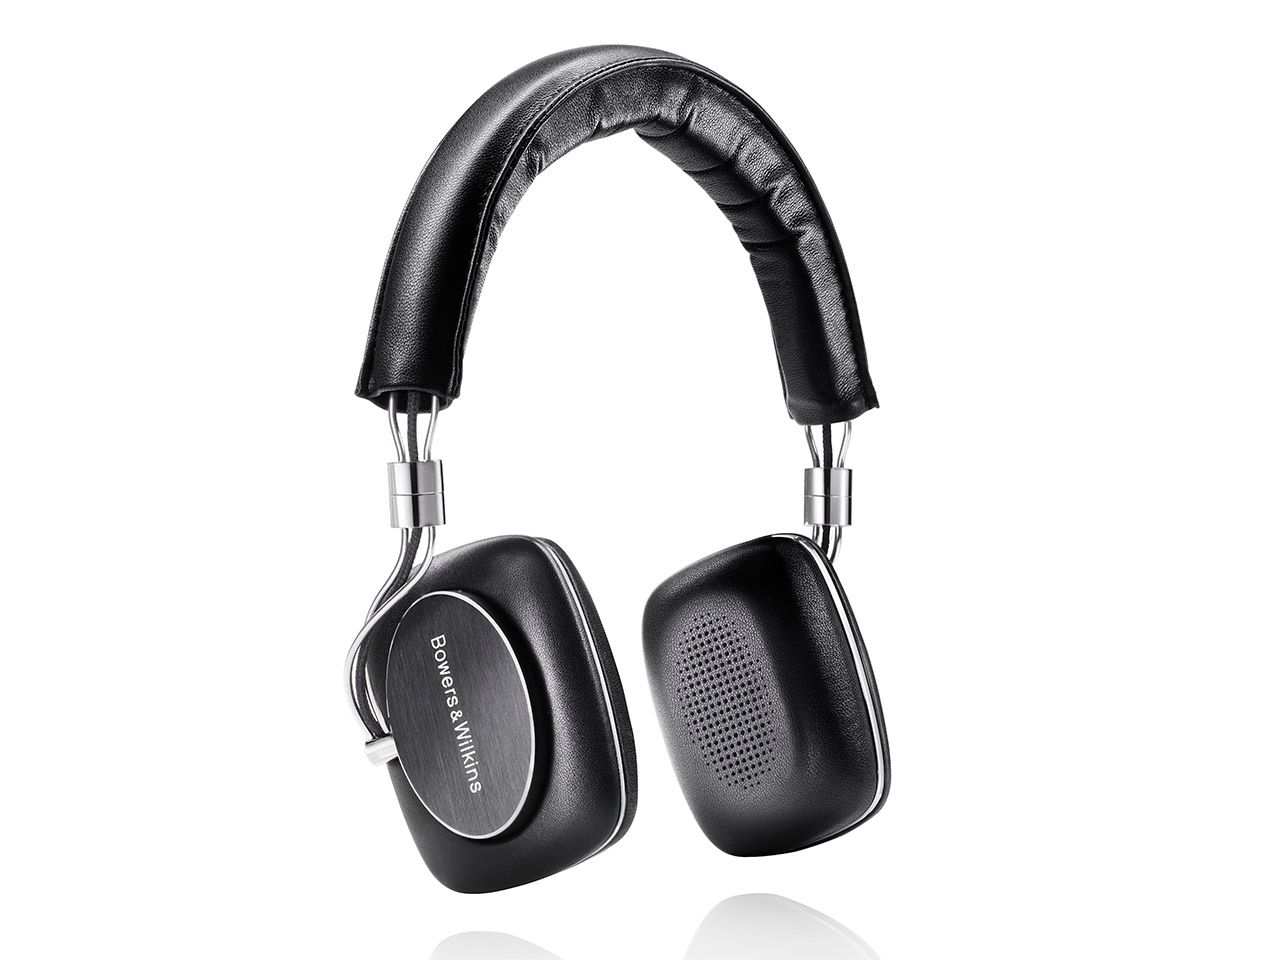 bowers wilkins p5 series 2 upgrades over ear cans with top spec drivers c5 s2 in ears also available image 1